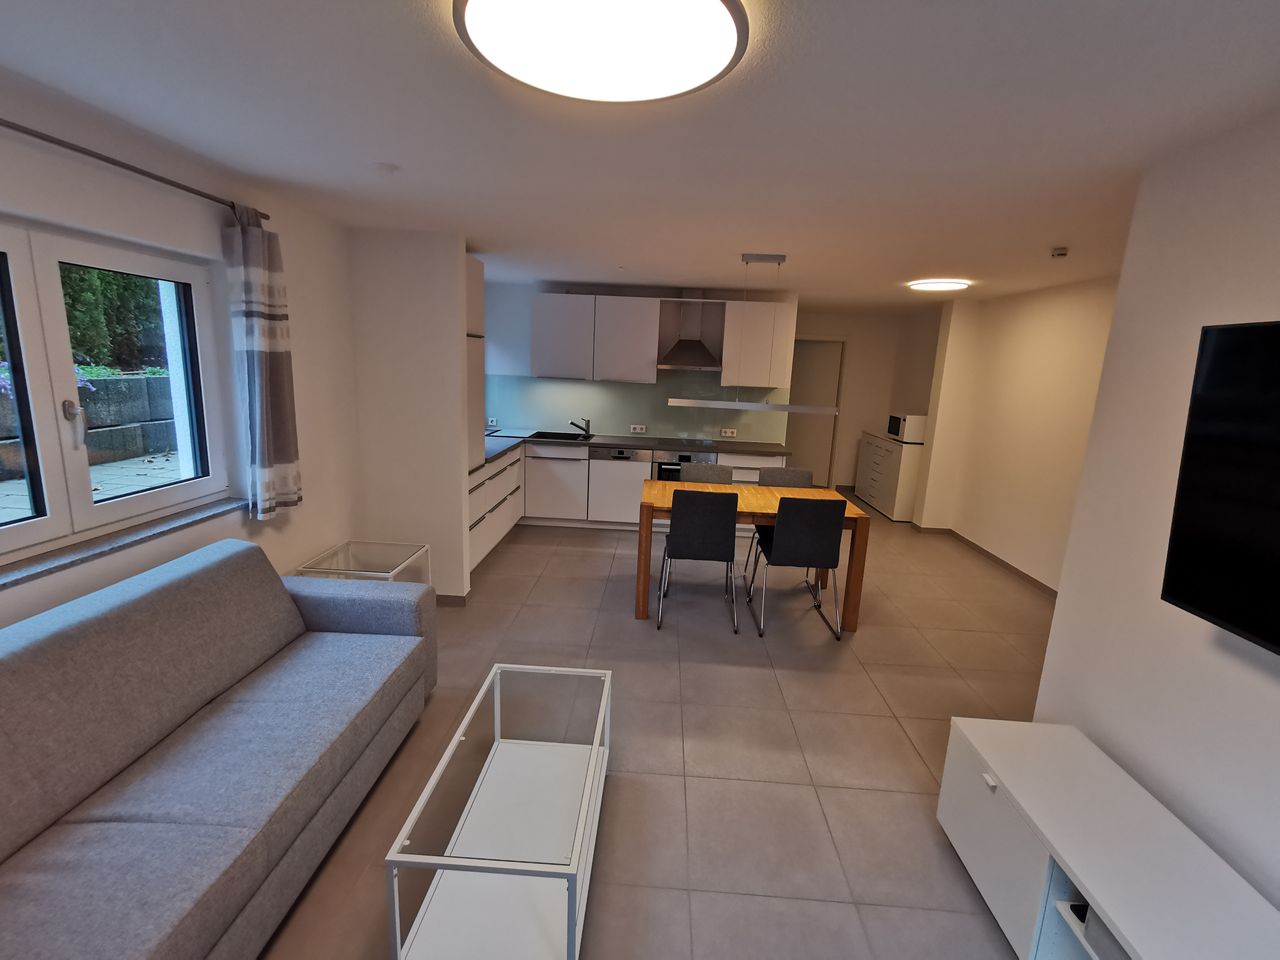 As good as new furnished 2 room apartment in quiet location in Stuttgart-Steinhaldenfeld